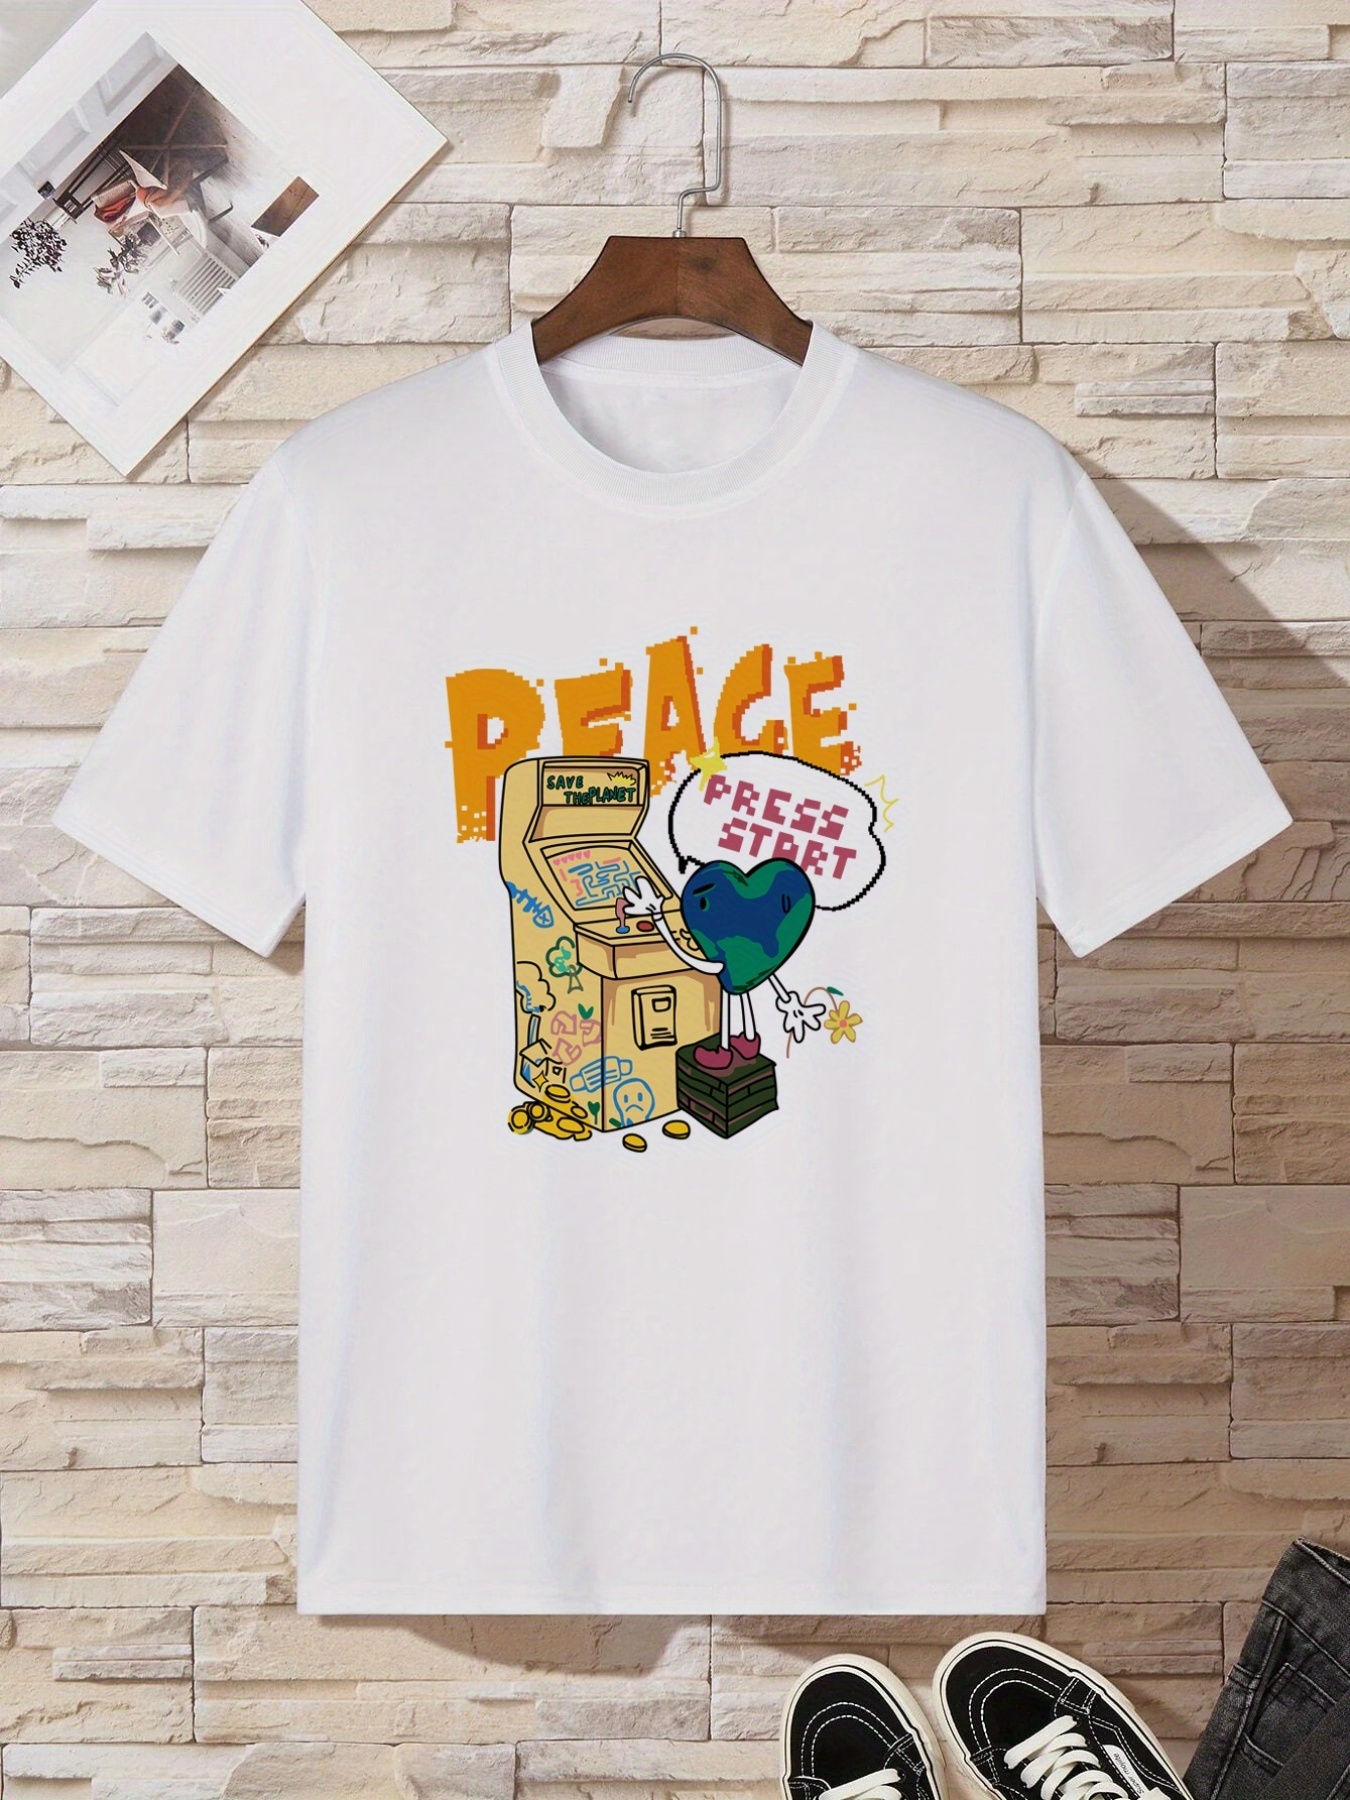 Peace Love World Womens X-LARGE White S/S Round Neck T-Shirt Top Tee  Stretch XL